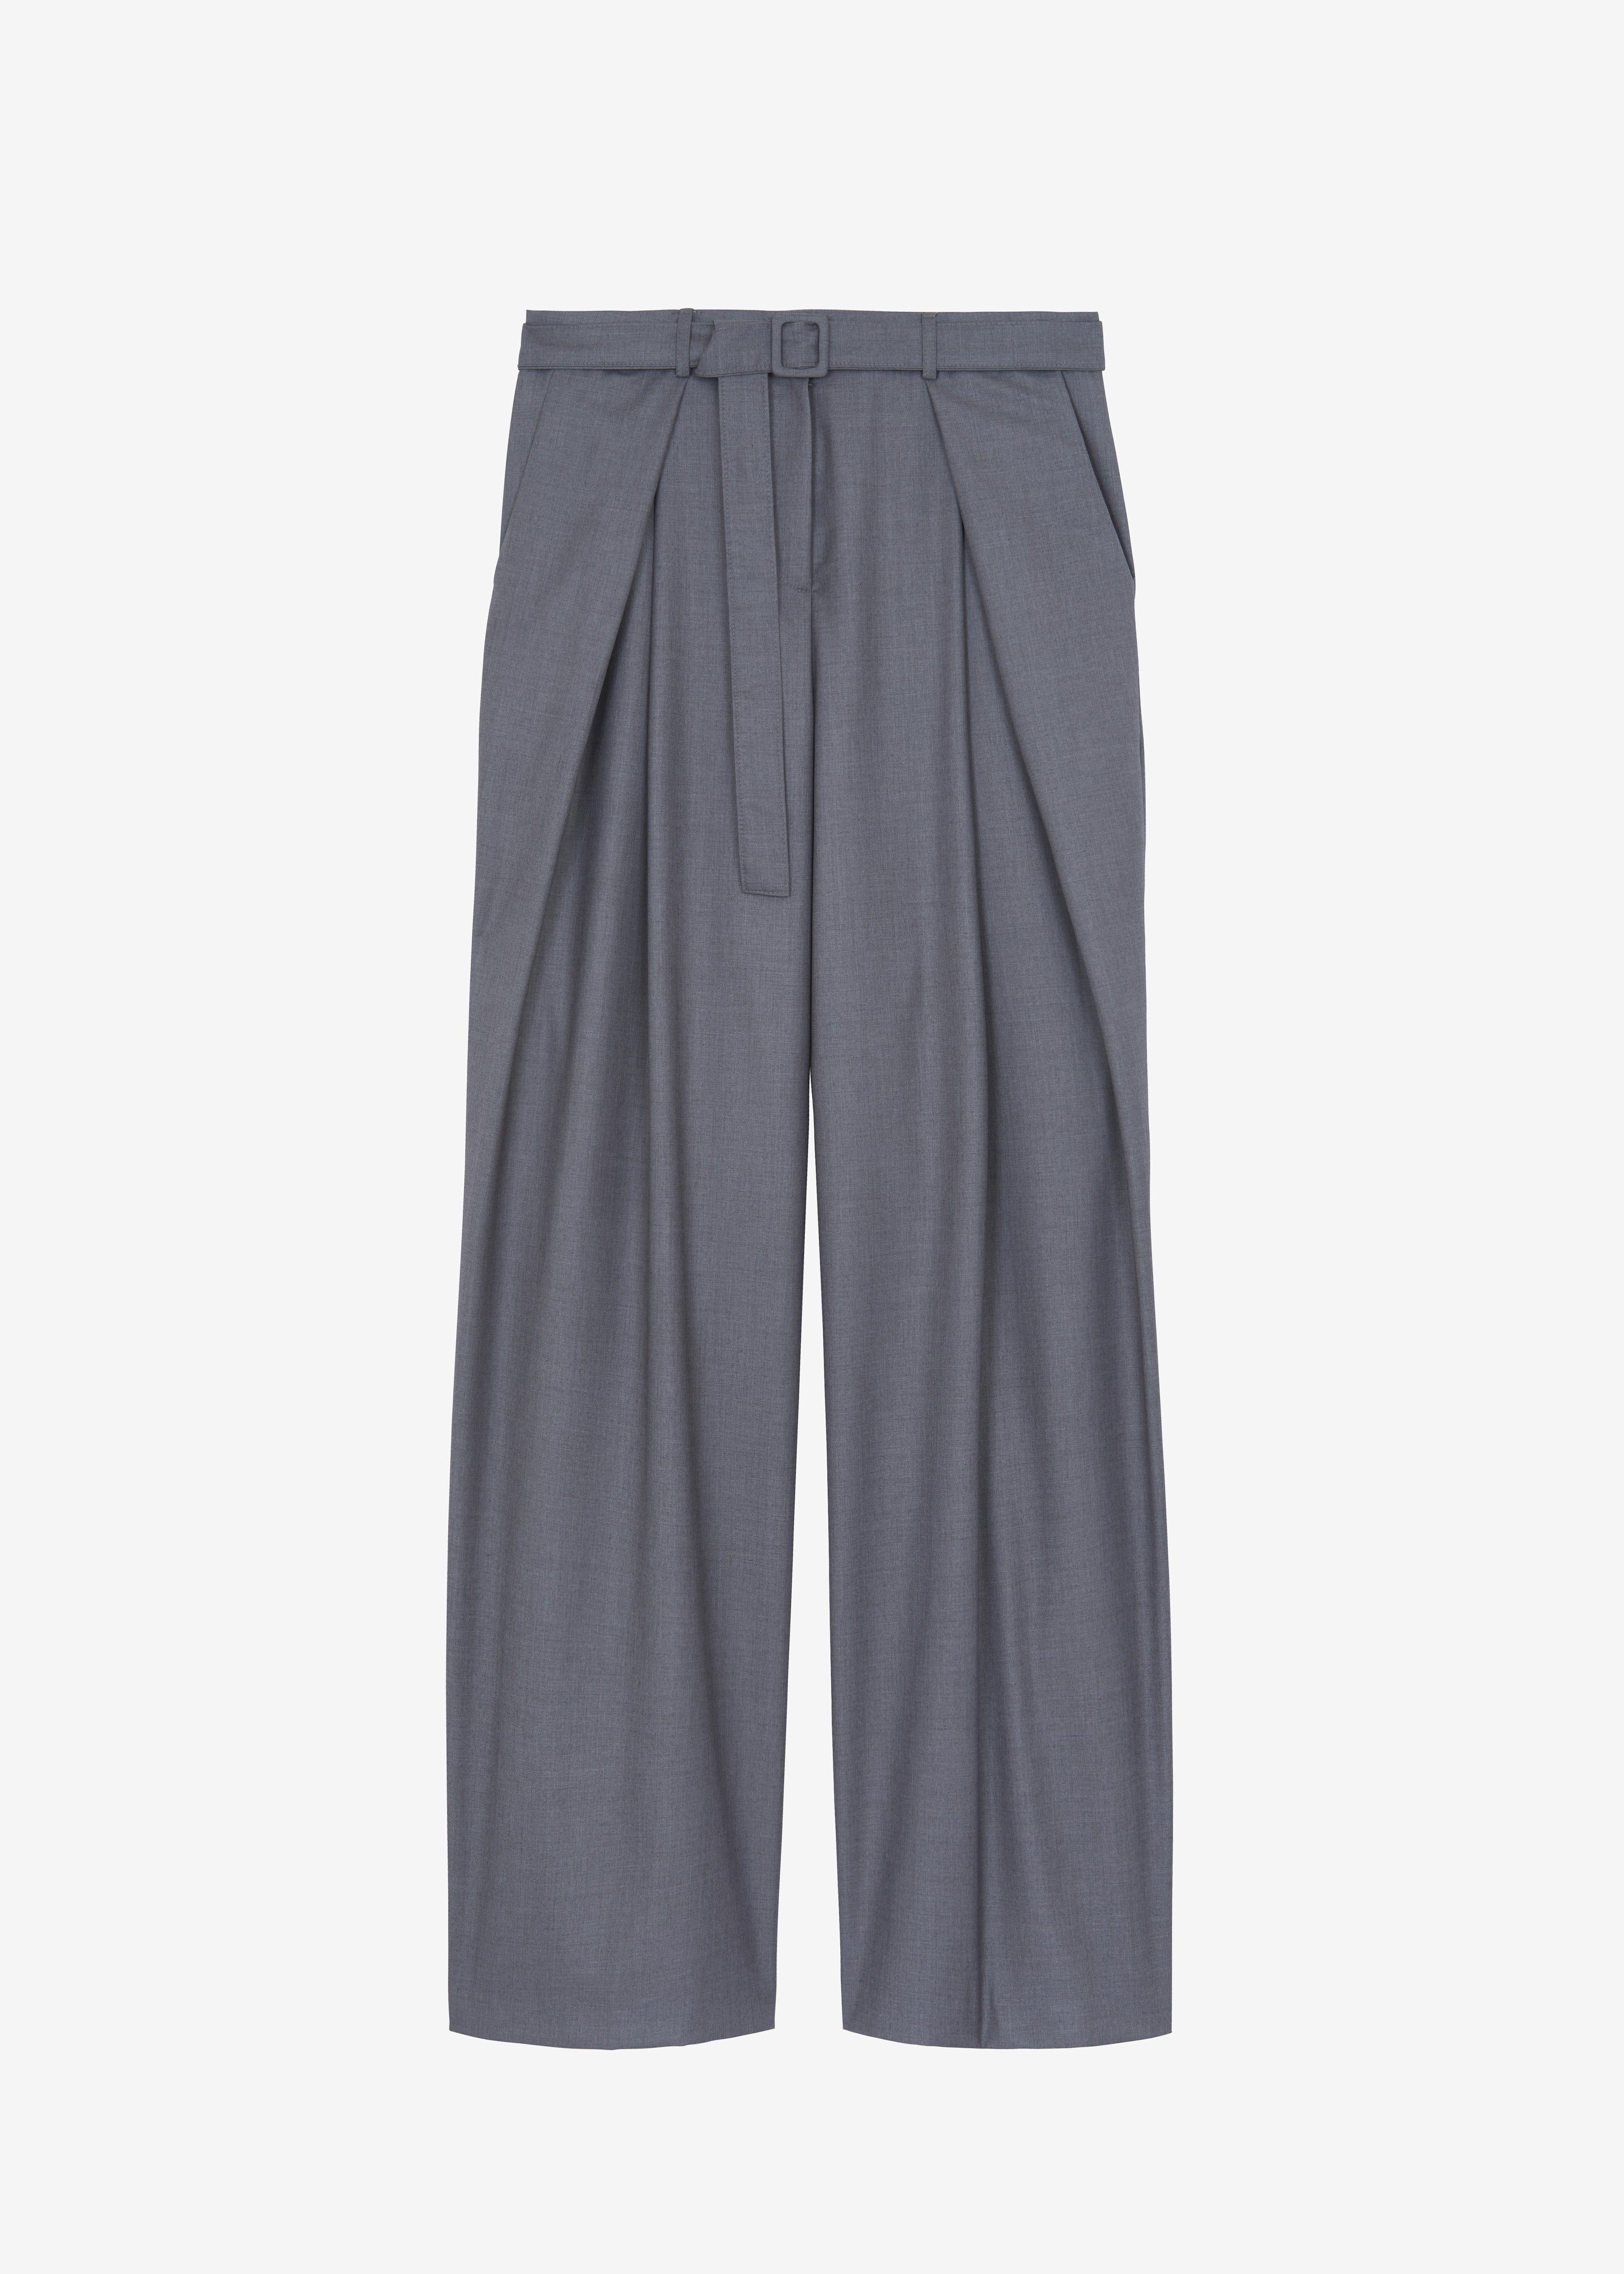 Clay Belted Pants - Grey - 10